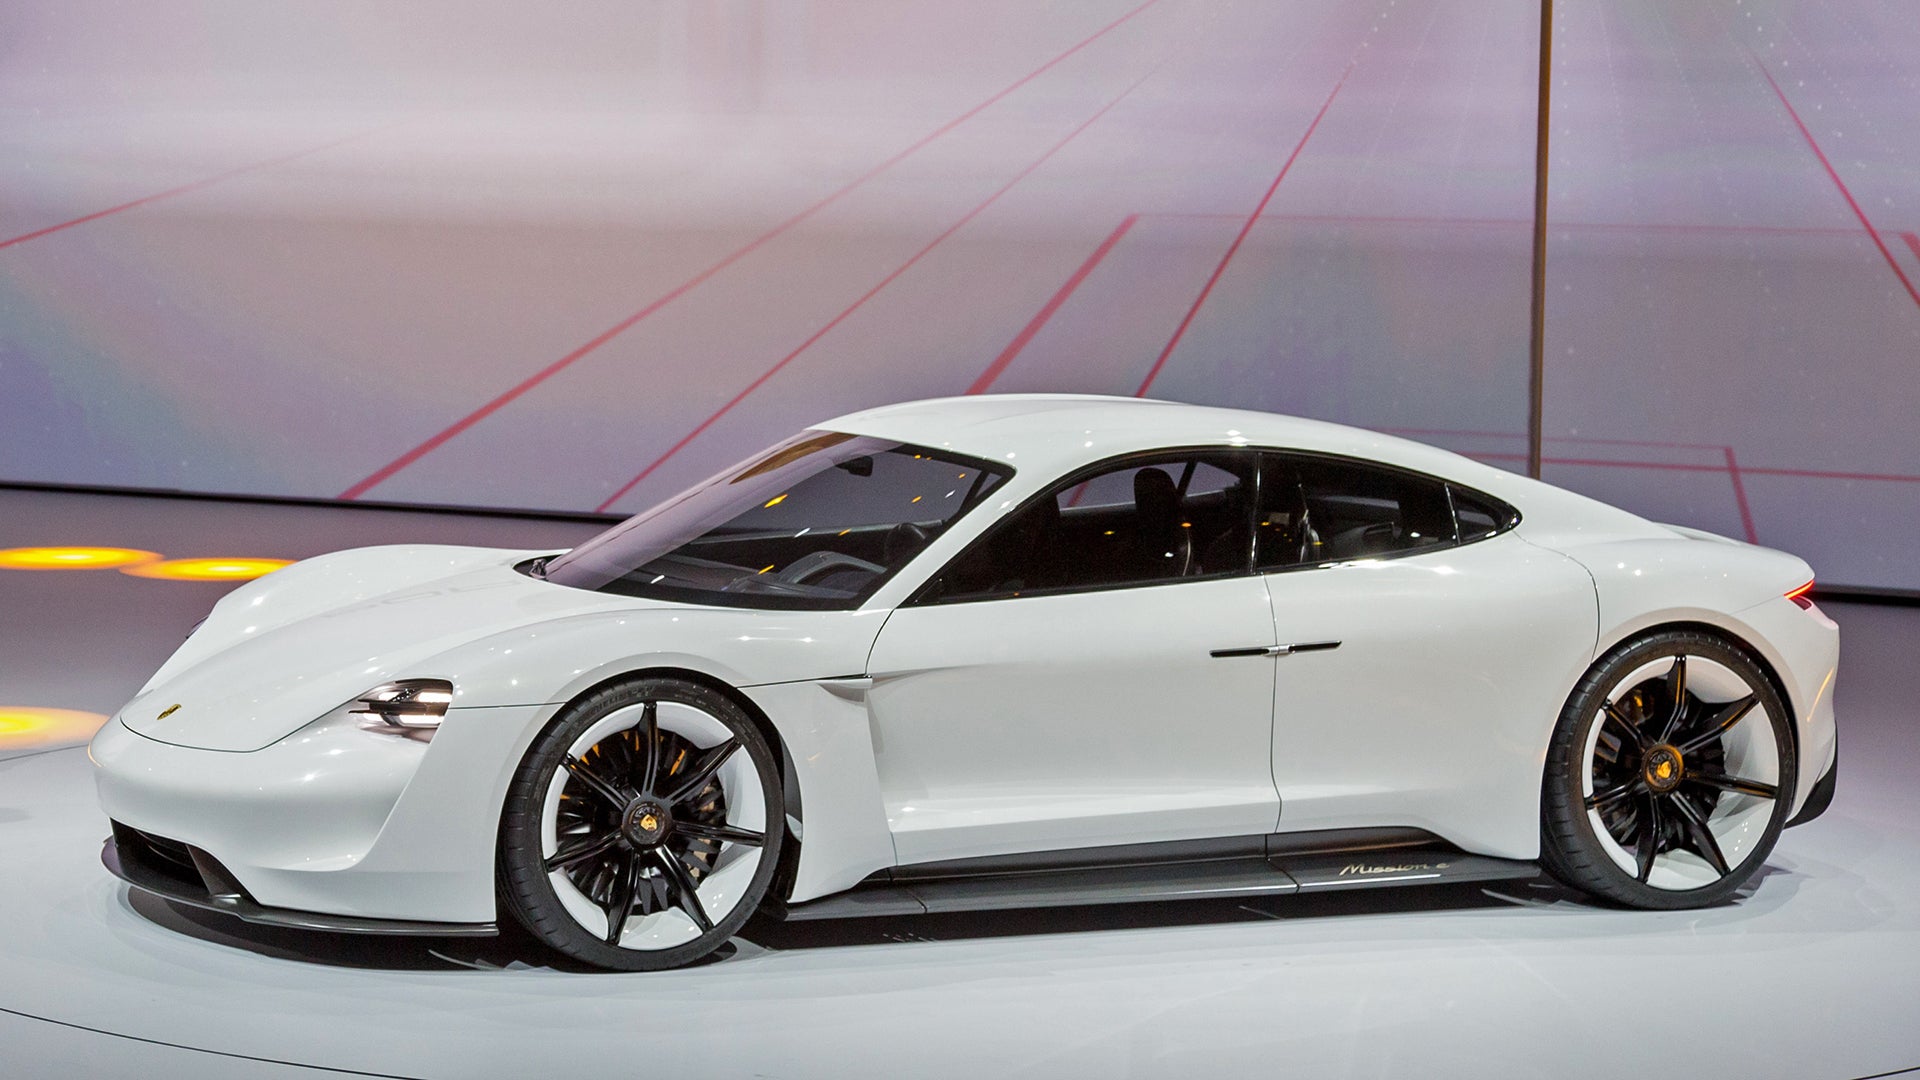 The 85 000 Fully Electric Porsche Mission E Will Arrive In 2019